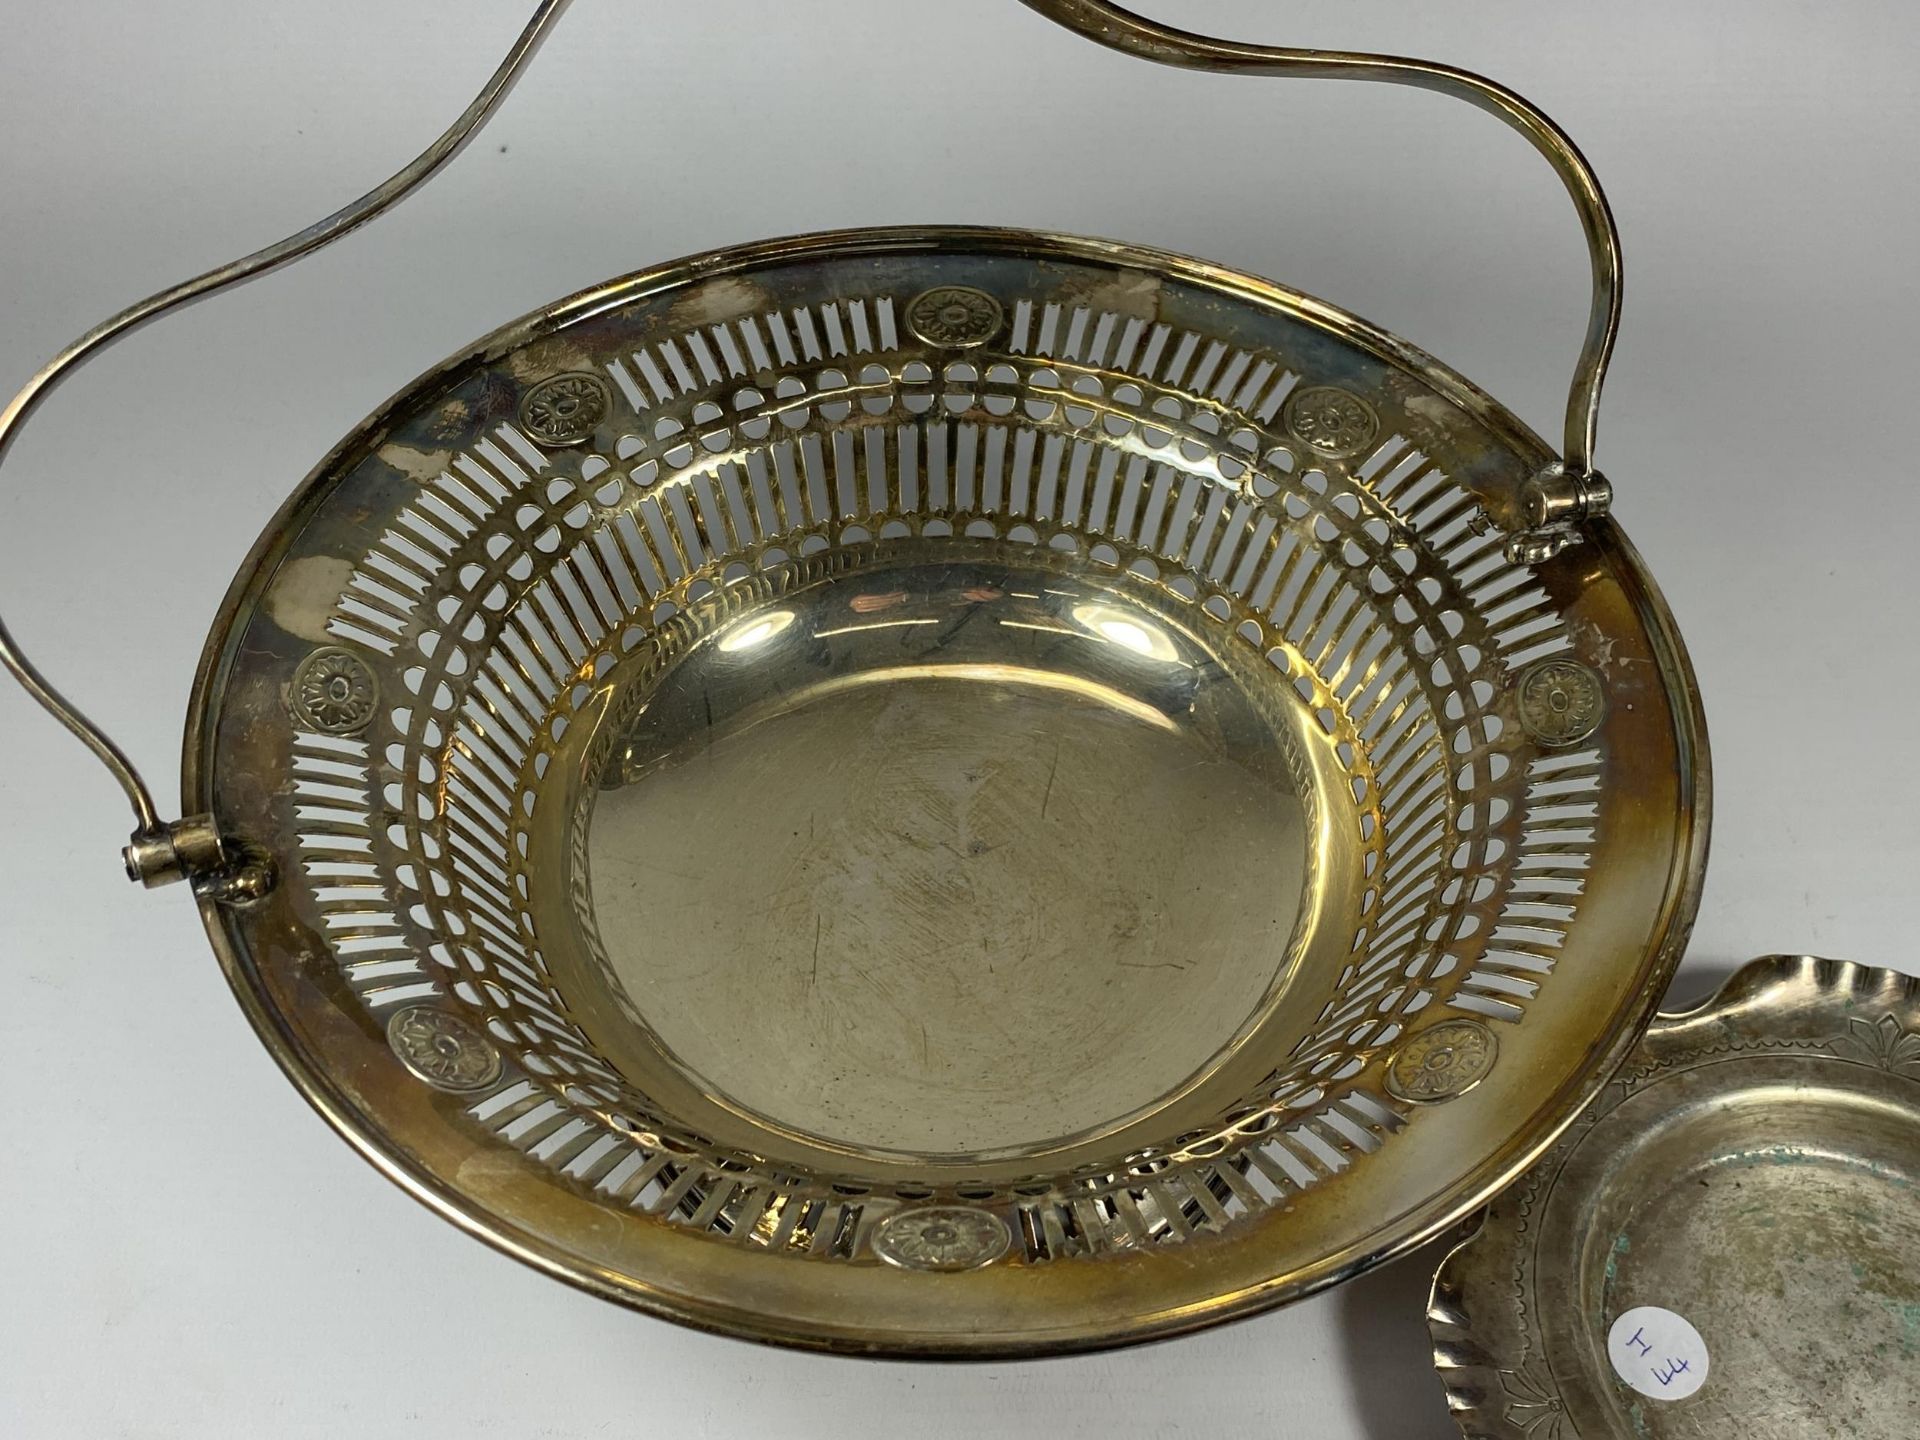 TWO VINTAGE SILVER PLATED ITEMS - PEDESTAL BOWL WITH PIERCED GALLERY DESIGN AND SMALLER DISH - Image 2 of 5